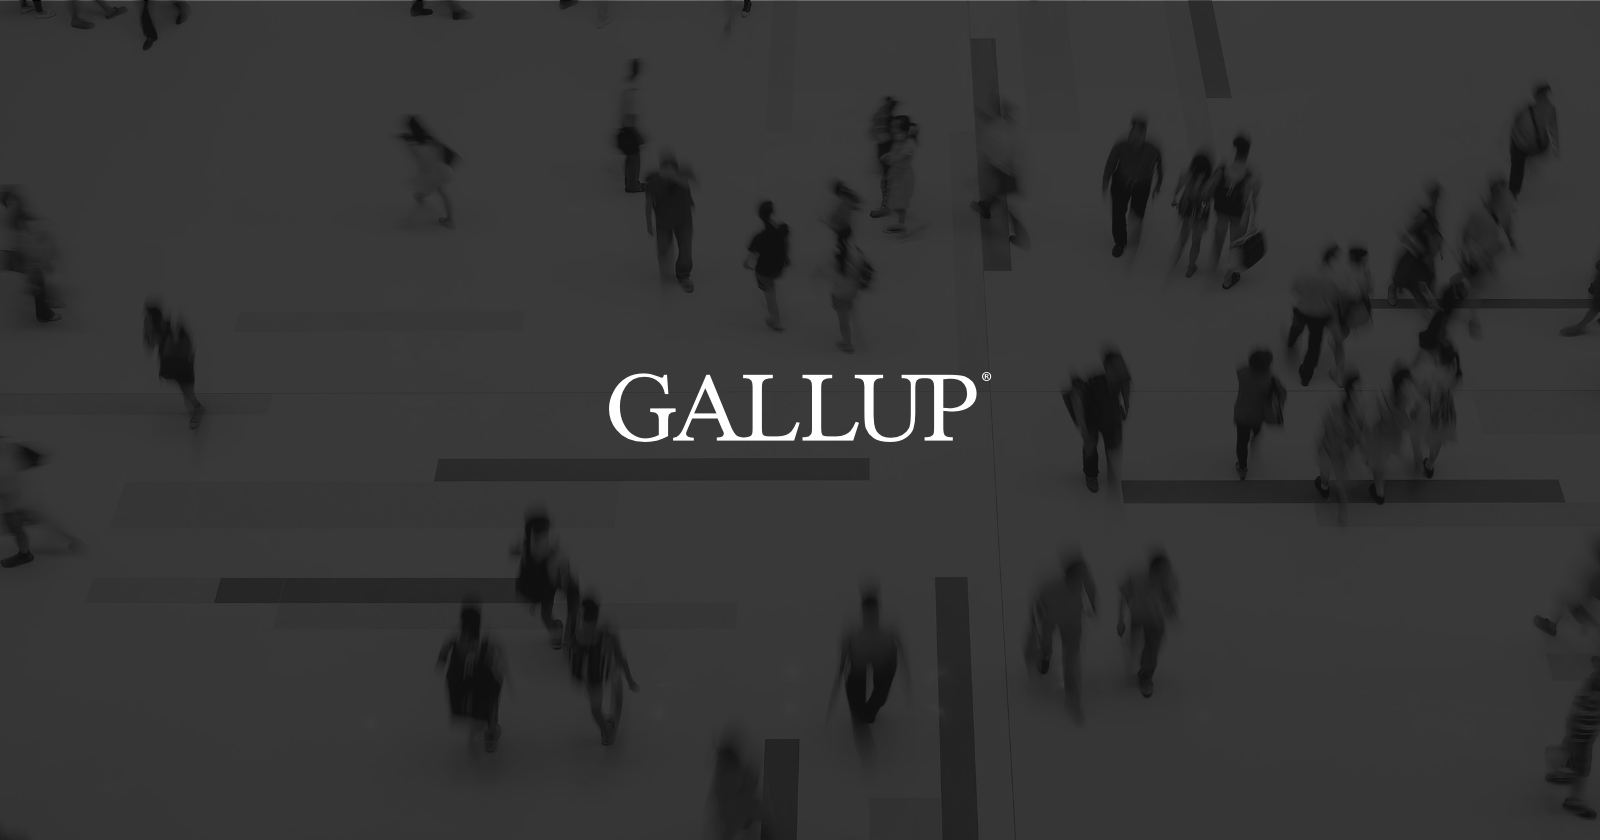 Gallup - Workplace Consulting & Global Research